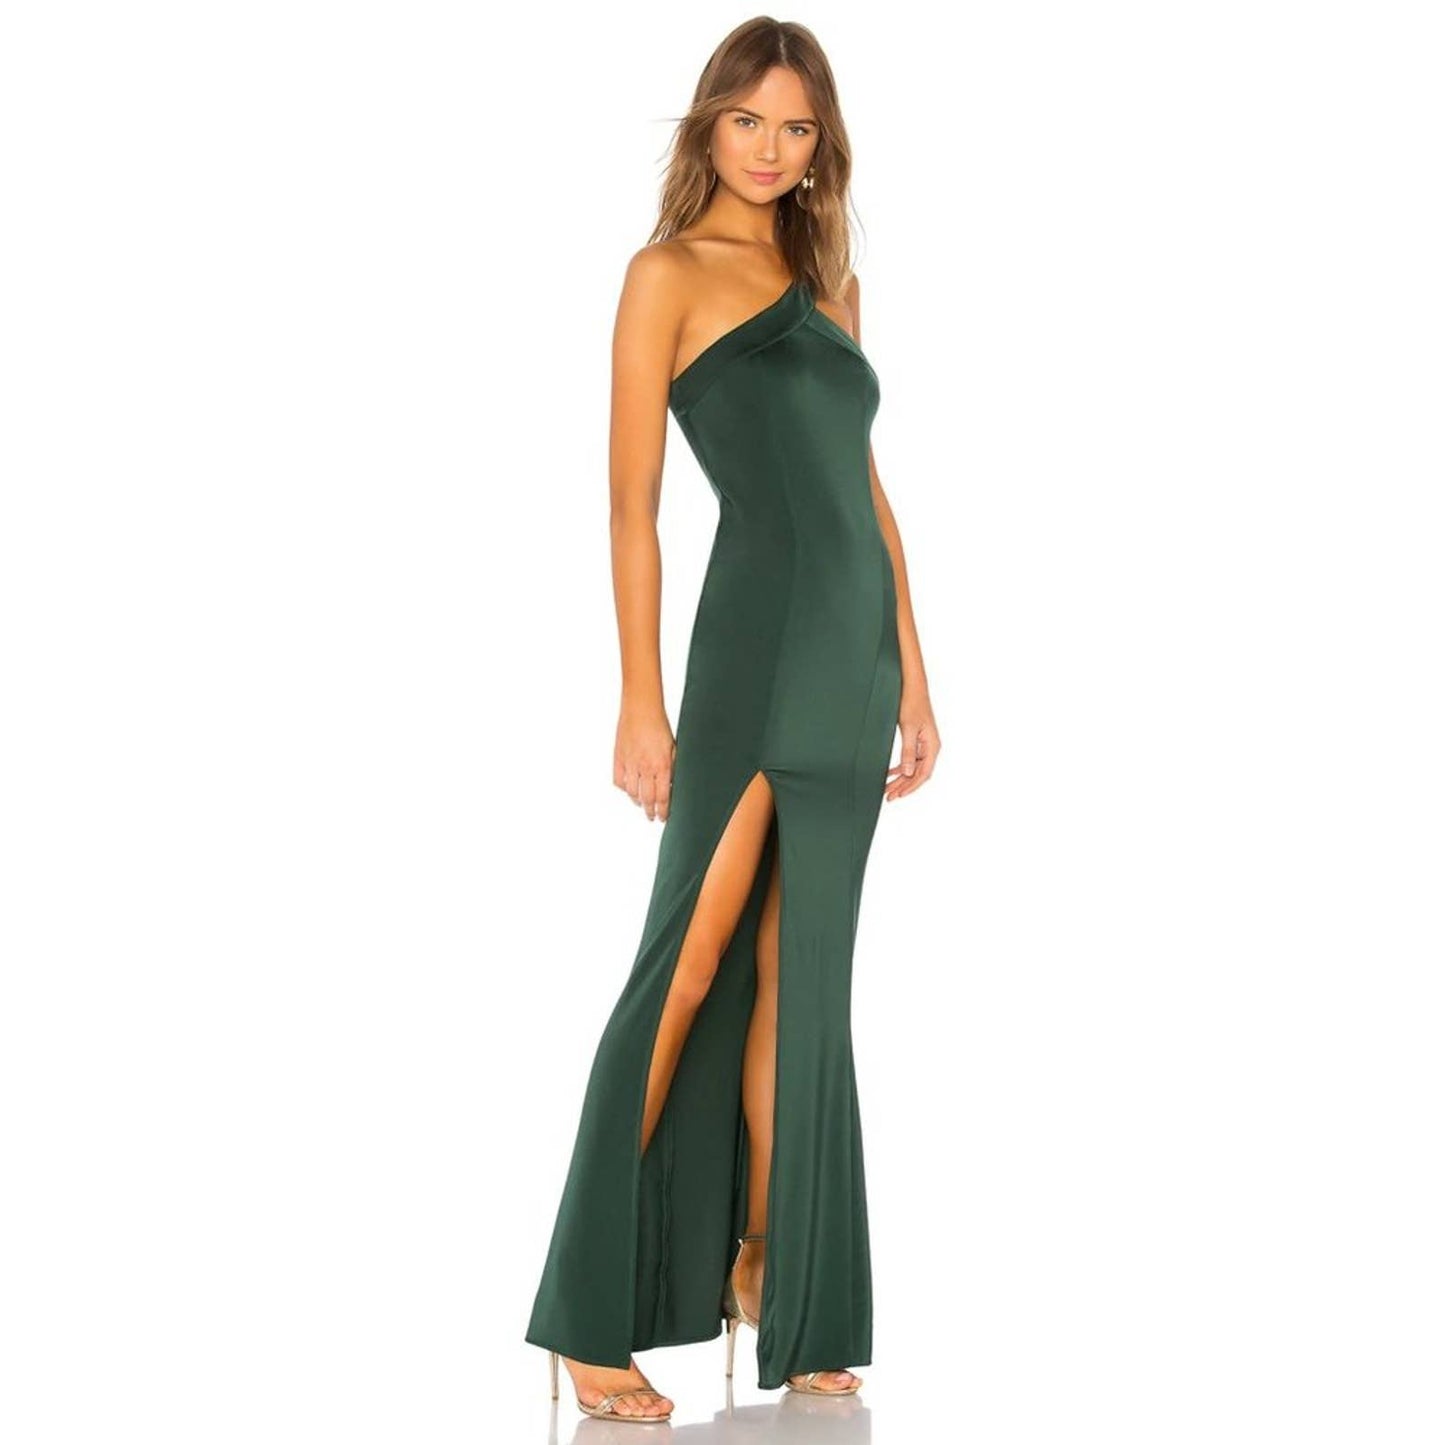 NBD Evan Gown in Emerald Green NWT in Small